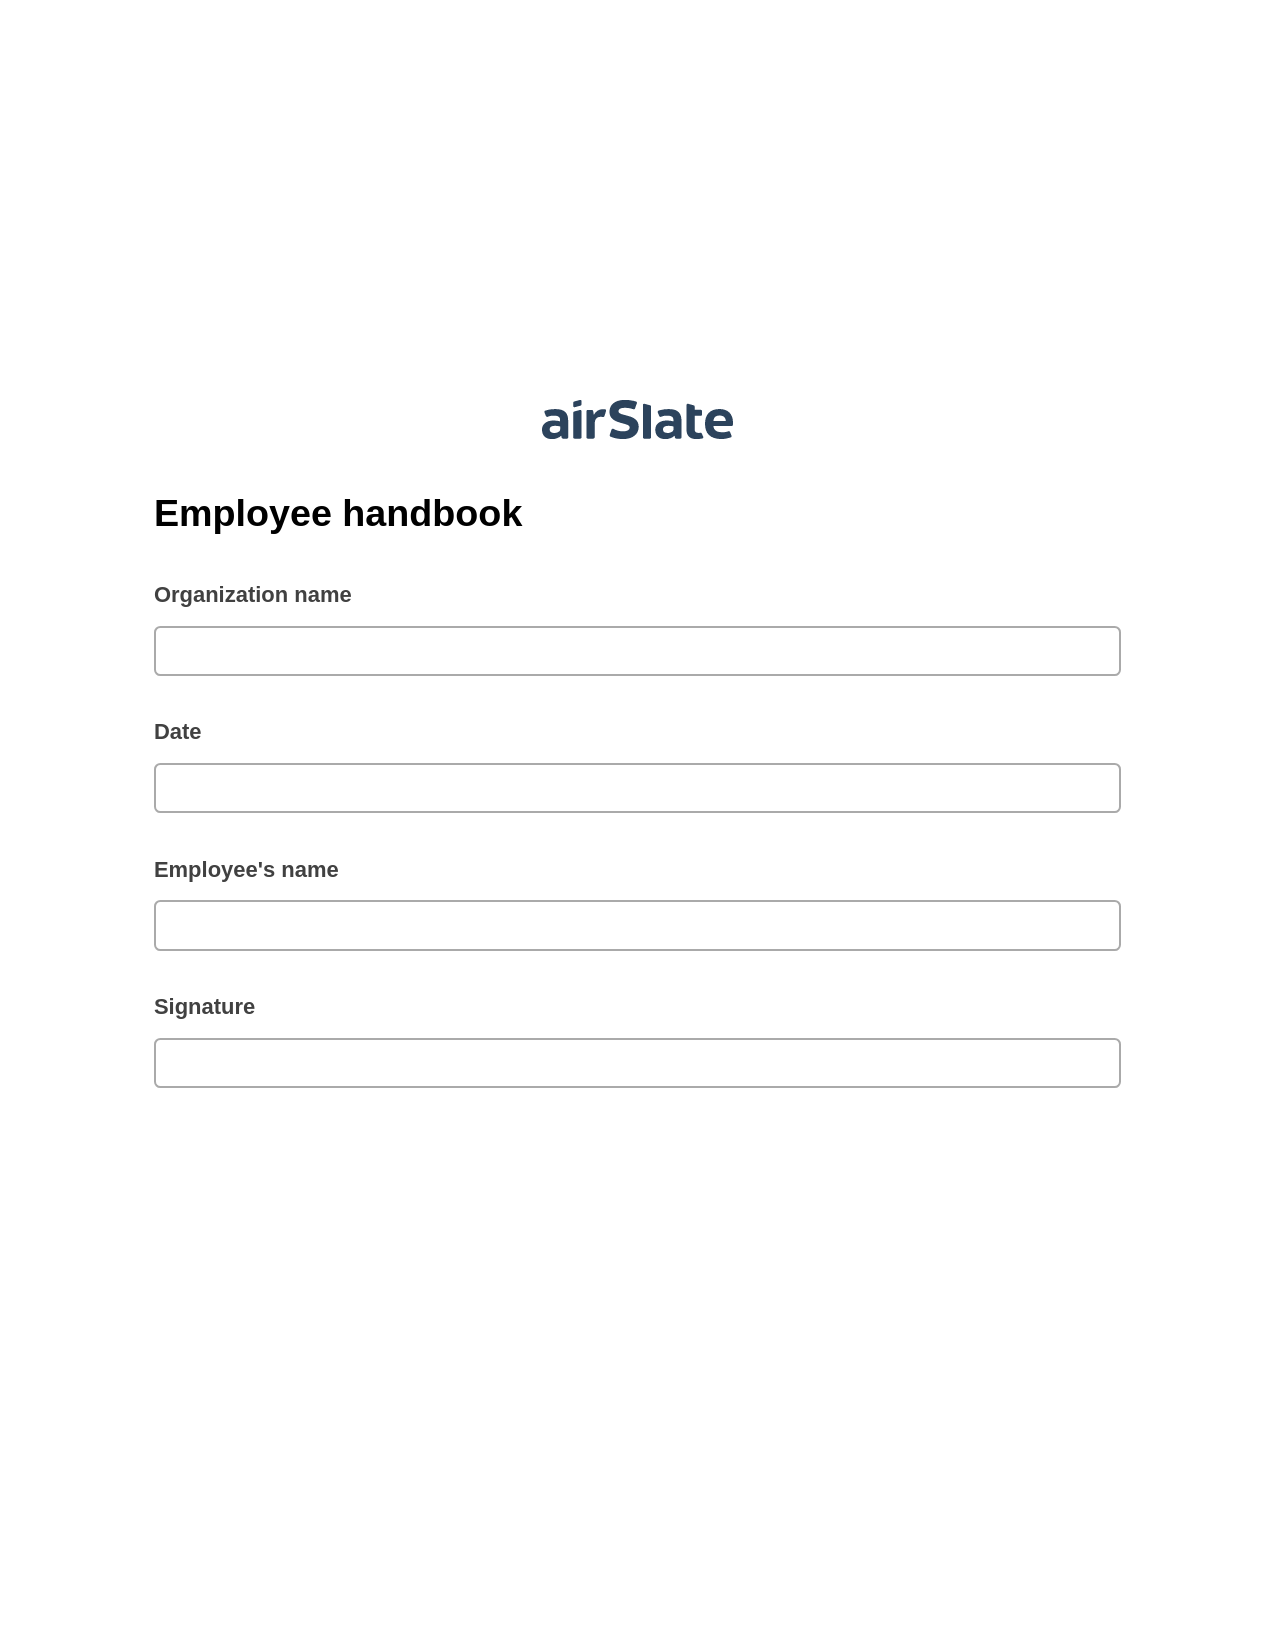 Multirole Employee handbook Pre-fill Slate from MS Dynamics 365 Records Bot, Create NetSuite Records Bot, Archive to SharePoint Folder Bot